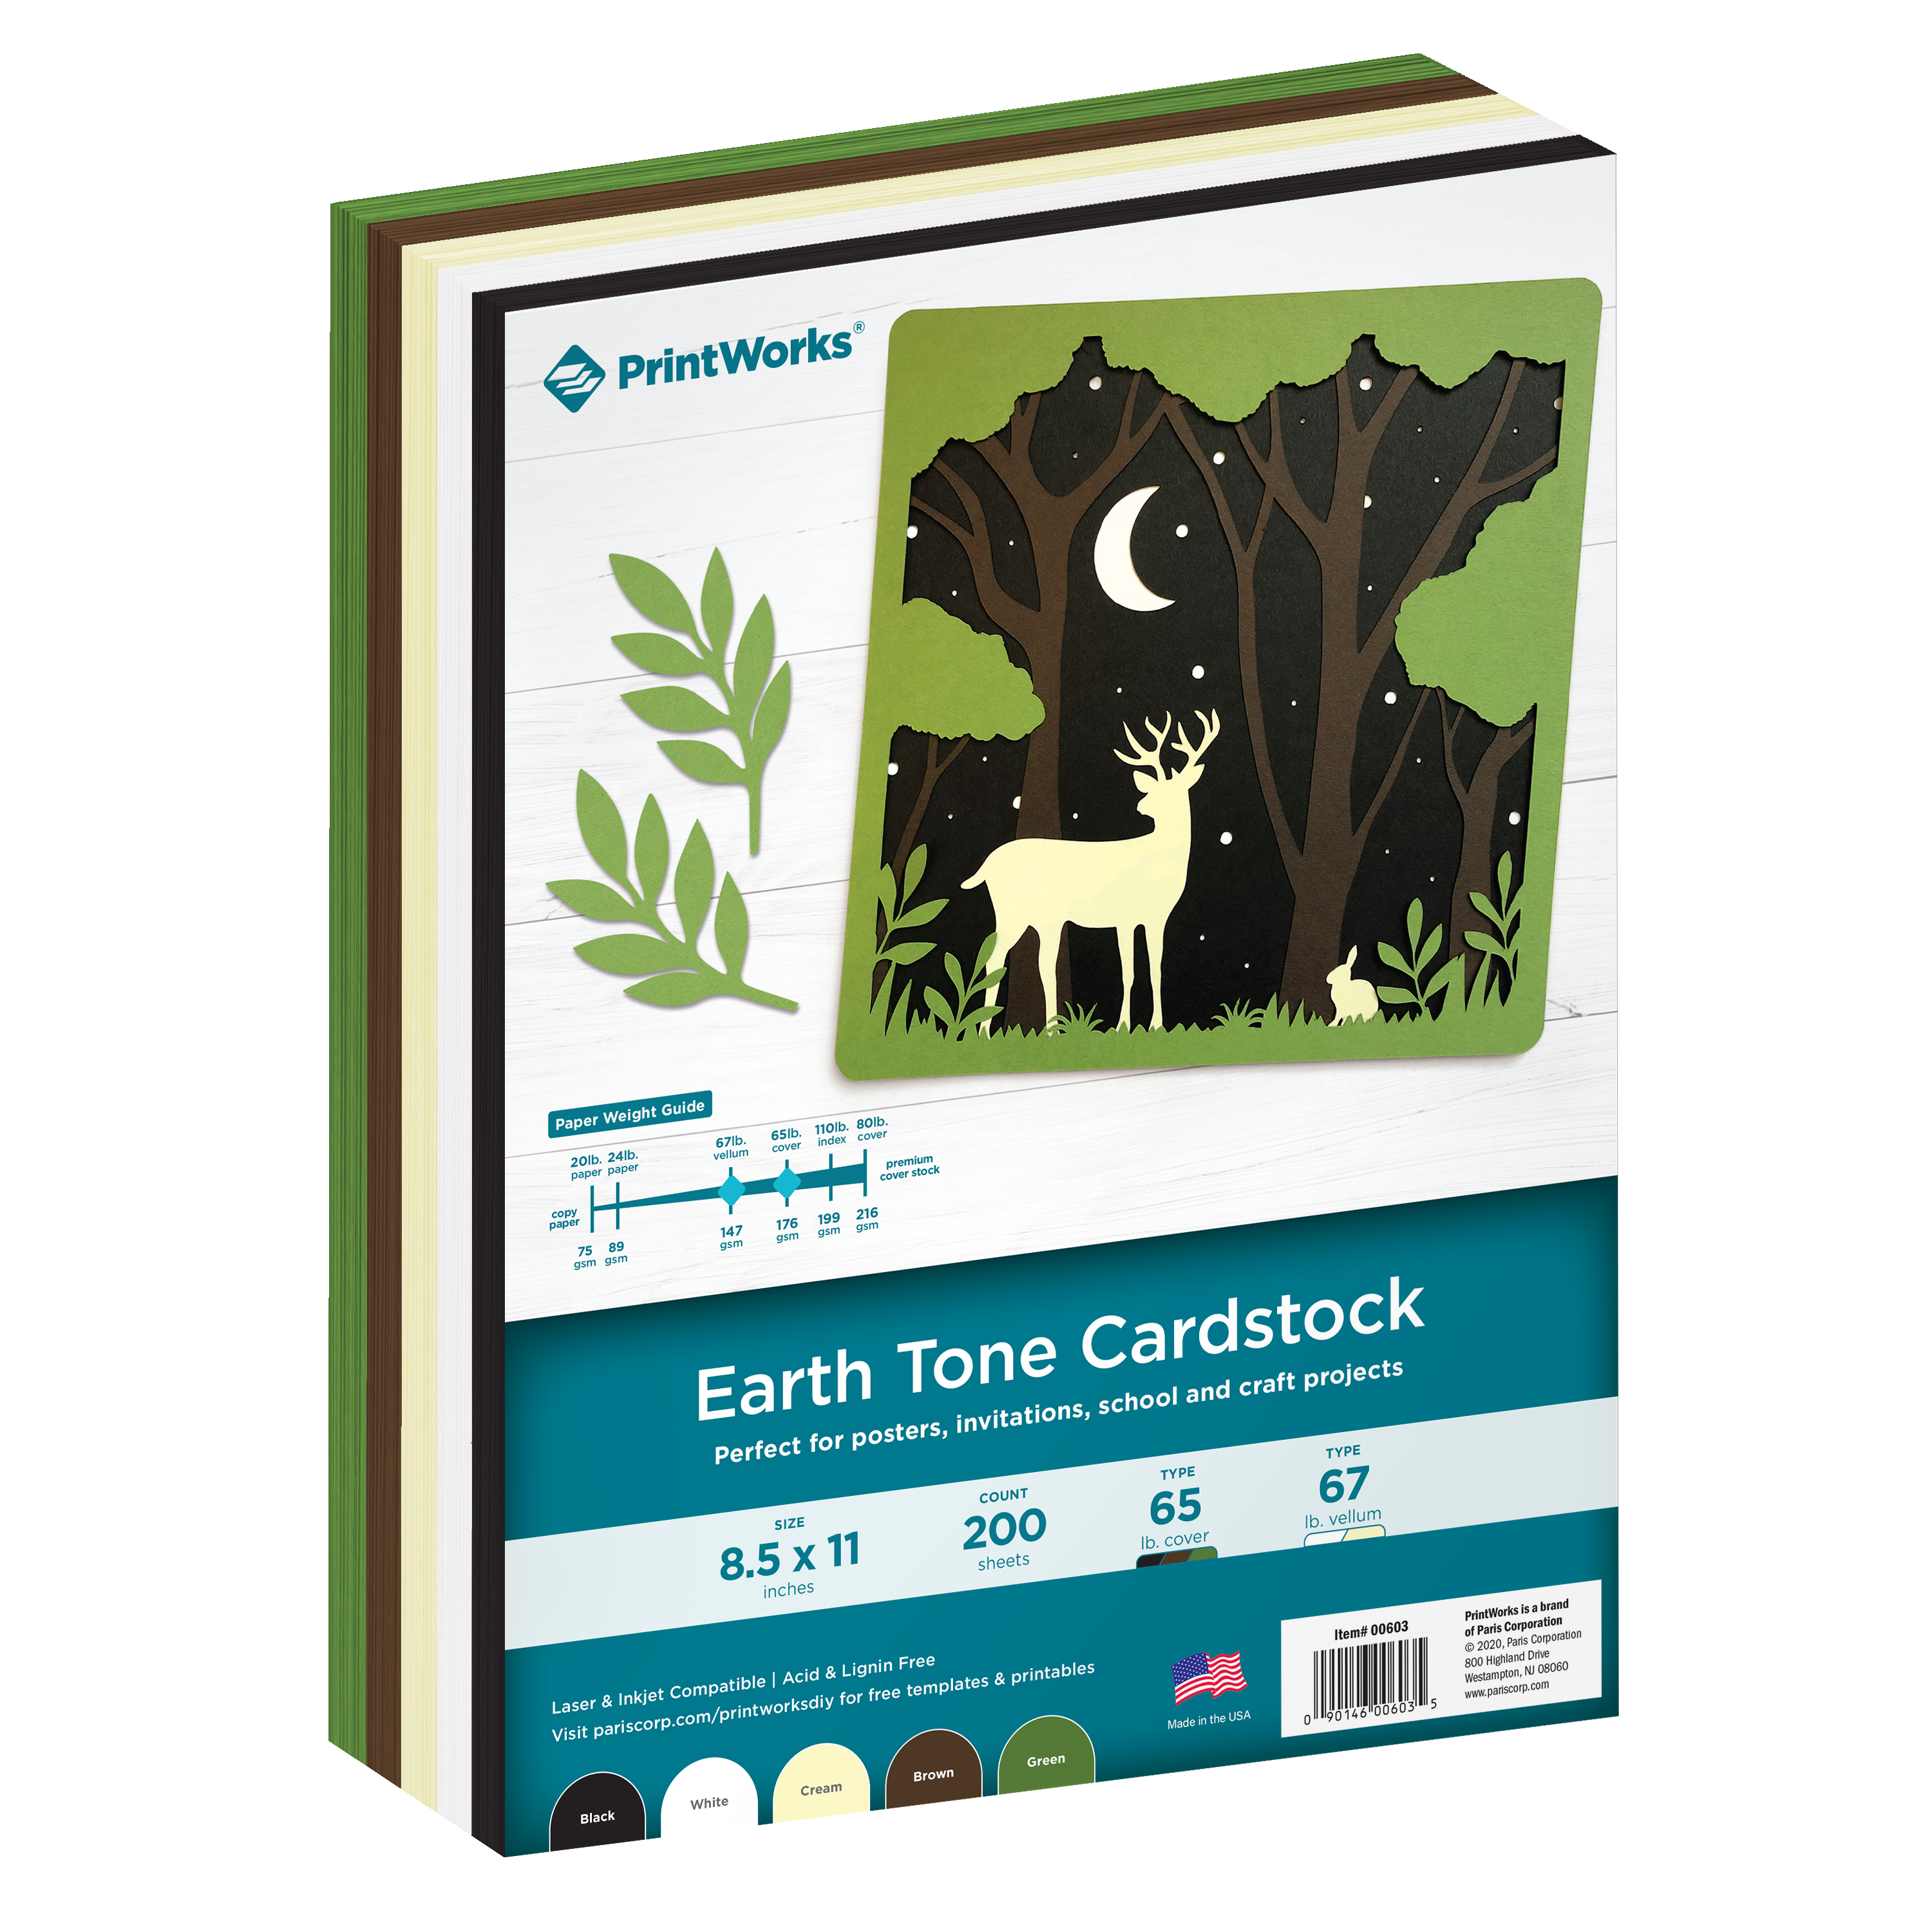 Earth Tone Cardstock by PrintWorks